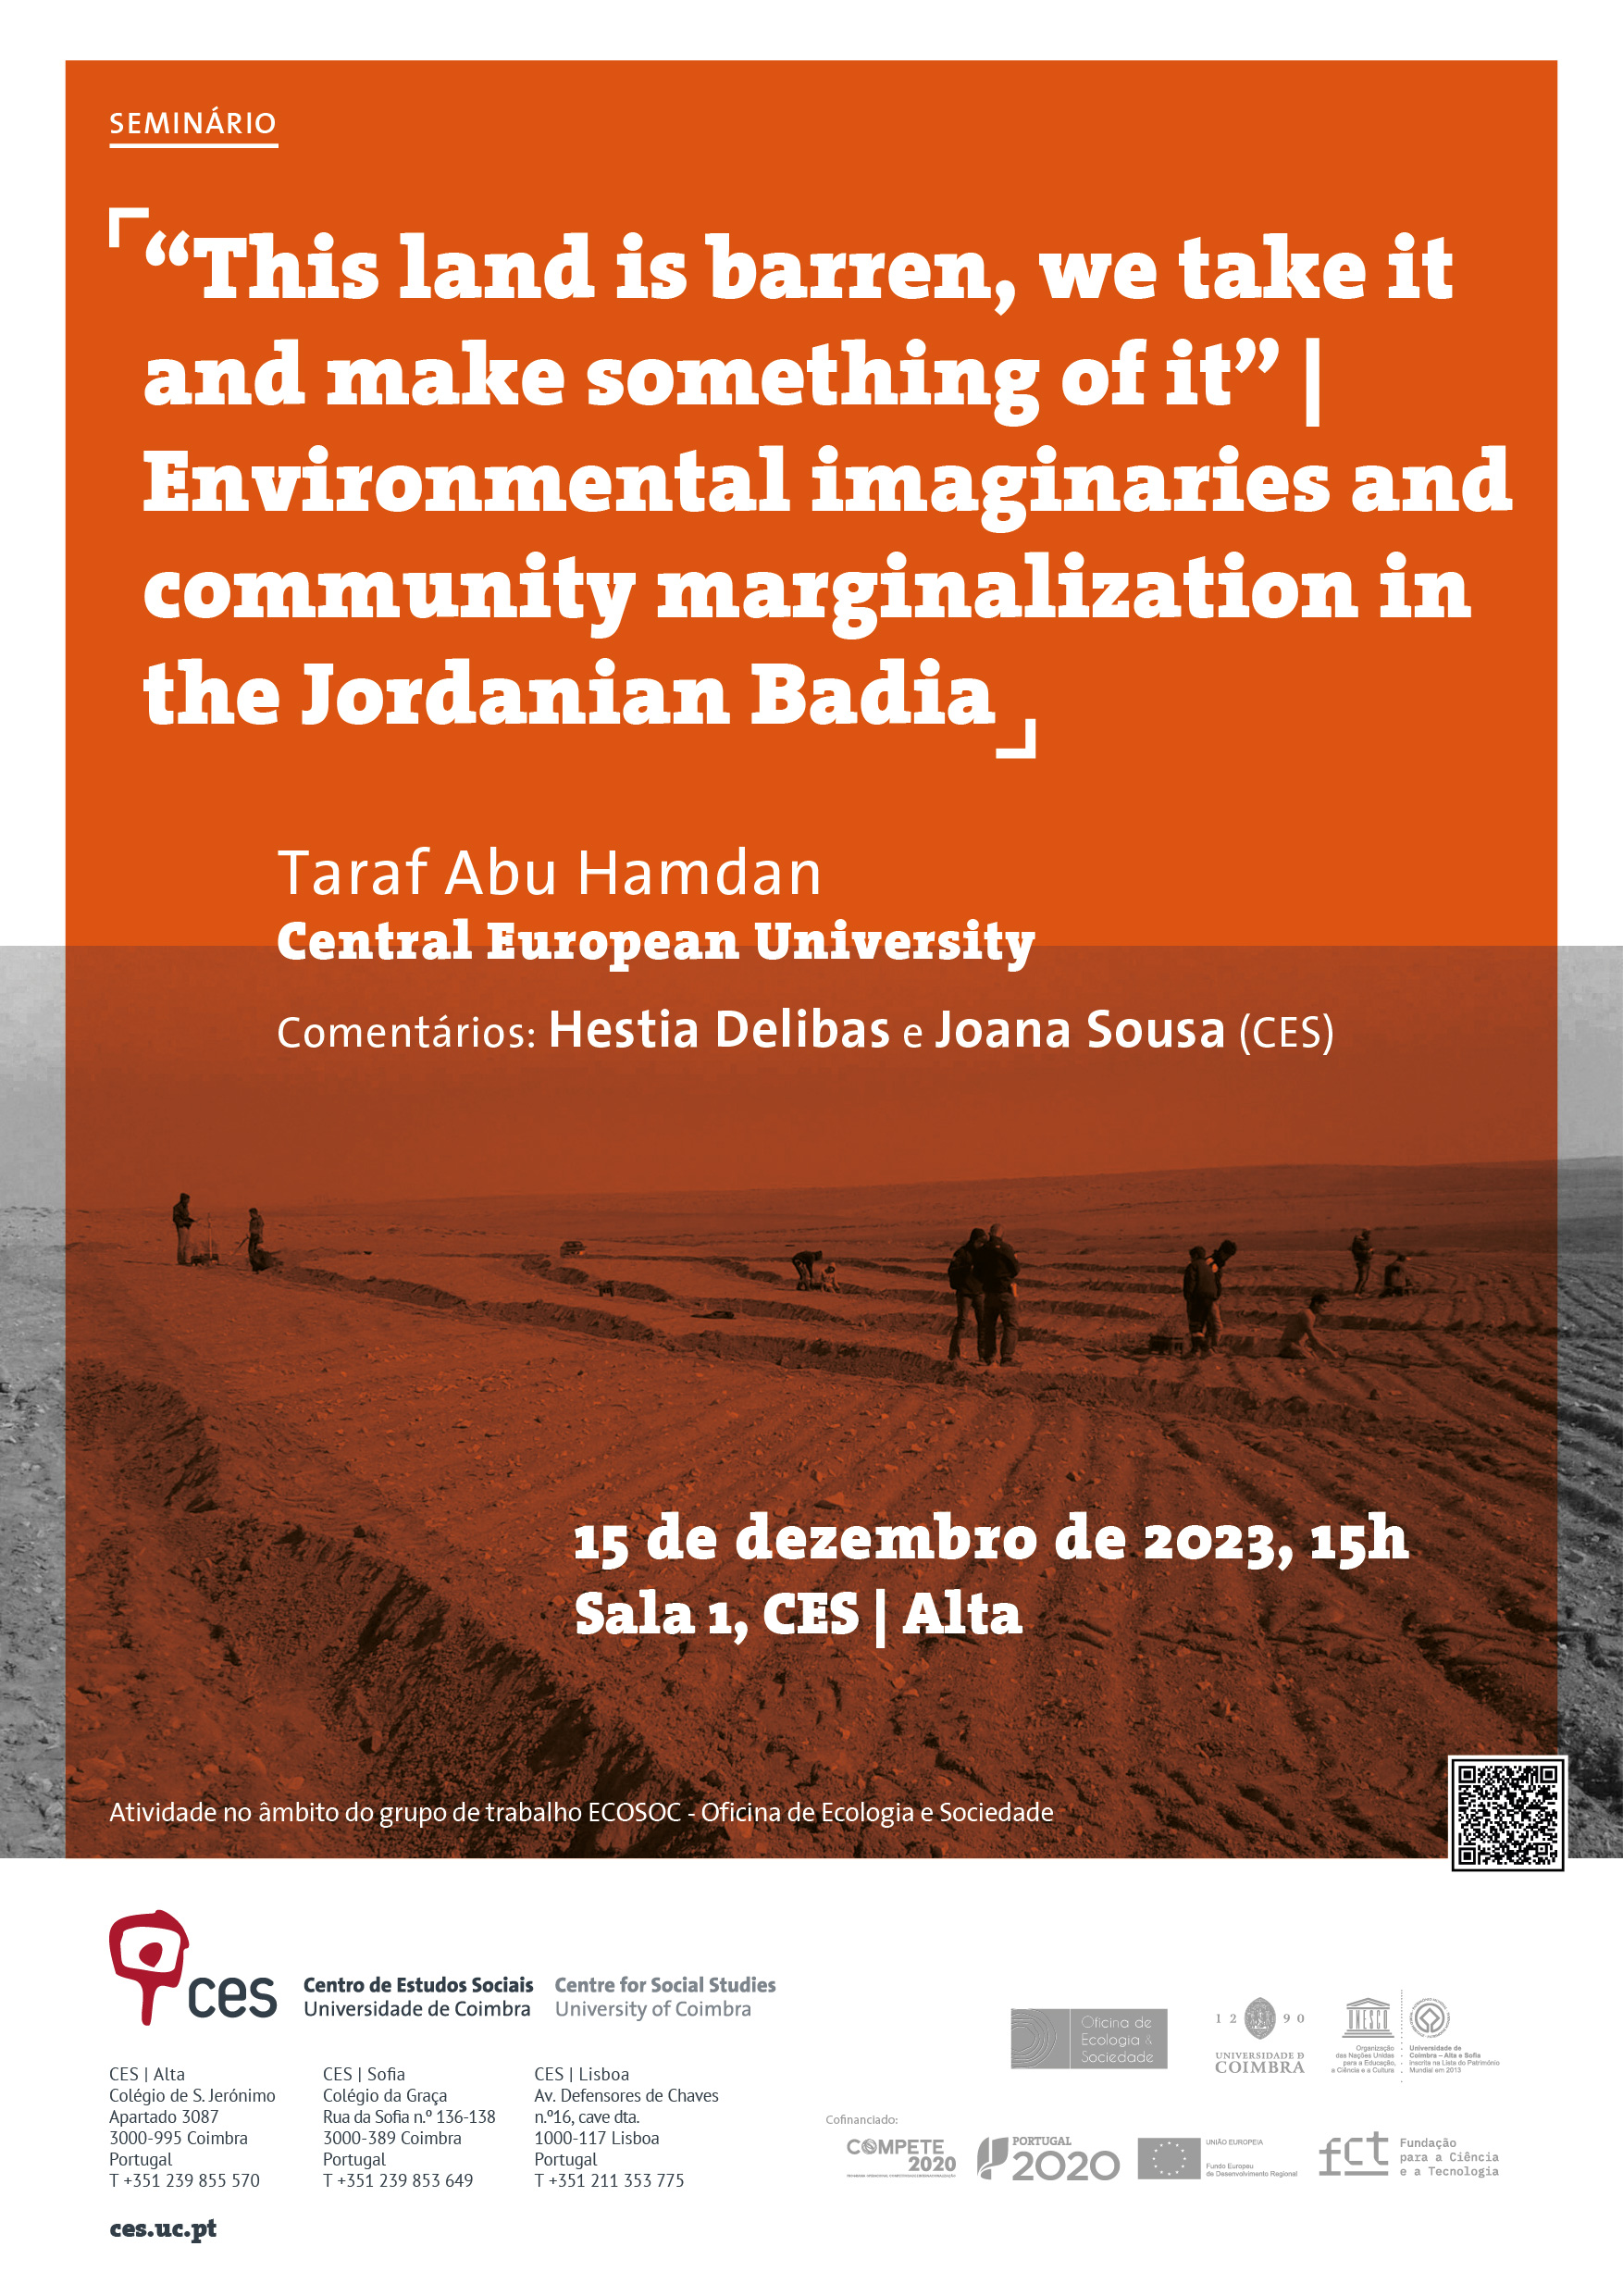 “This land is barren, we take it and make something of it” | Environmental imaginaries and community marginalization in the Jordanian Badia <span id="edit_44686"><script>$(function() { $('#edit_44686').load( "/myces/user/editobj.php?tipo=evento&id=44686" ); });</script></span>